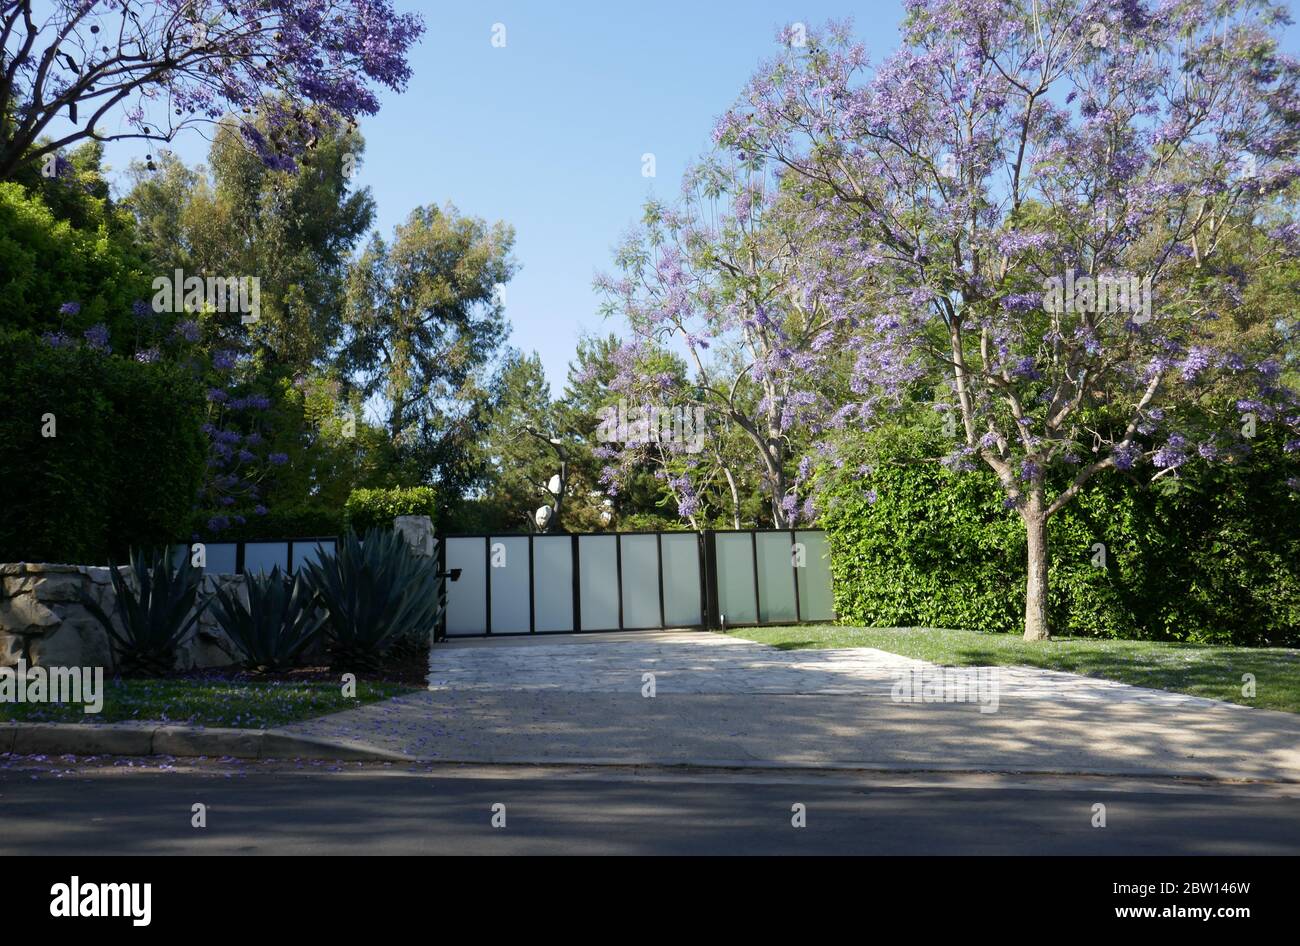 Beverly Hills, California, USA 28th May 2020 A general view of atmosphere of Gary Cooper's home at 200 Baroda Drive on May 28, 2020 in Beverly Hills, California, USA. Photo by Barry King/Alamy Stock Photo Stock Photo